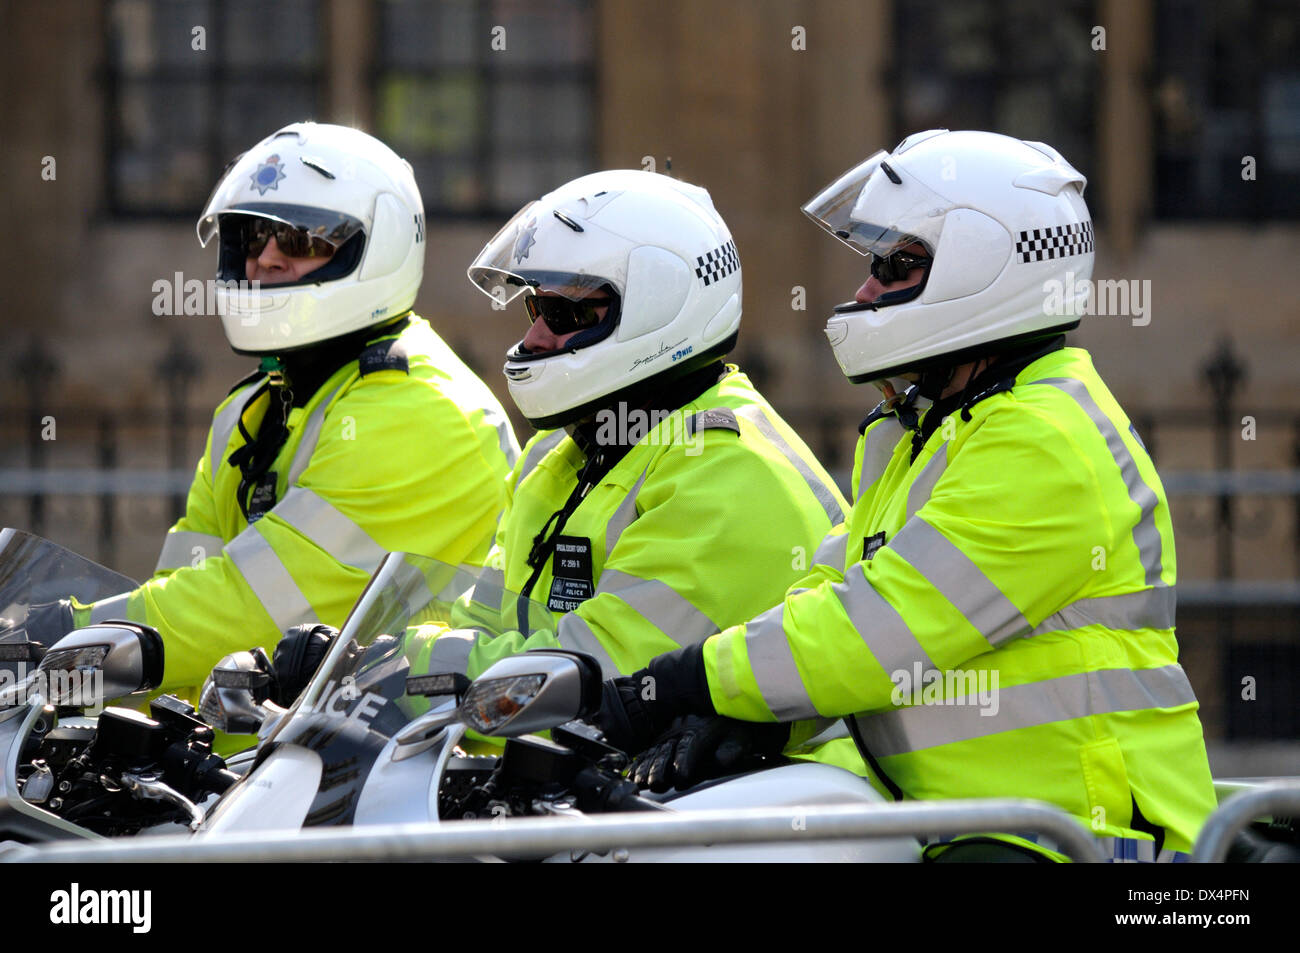 Metropolitan Police motorcyclists of the Special Escort Group accompanying the Royal Family in London Stock Photo